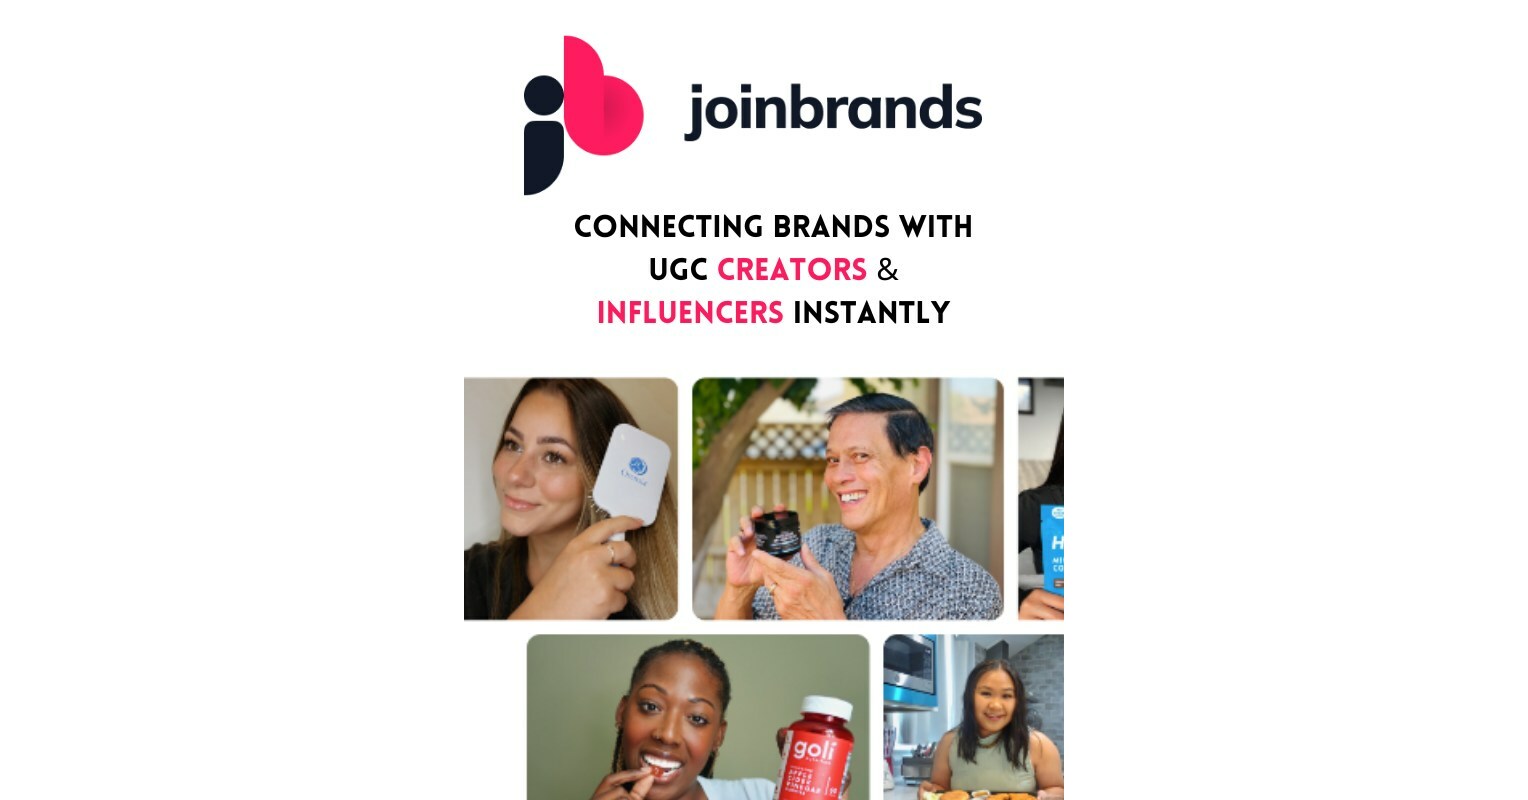 JoinBrands has Become a Growth Leader in the UGC Creator and Influencer Marketing Platform Space